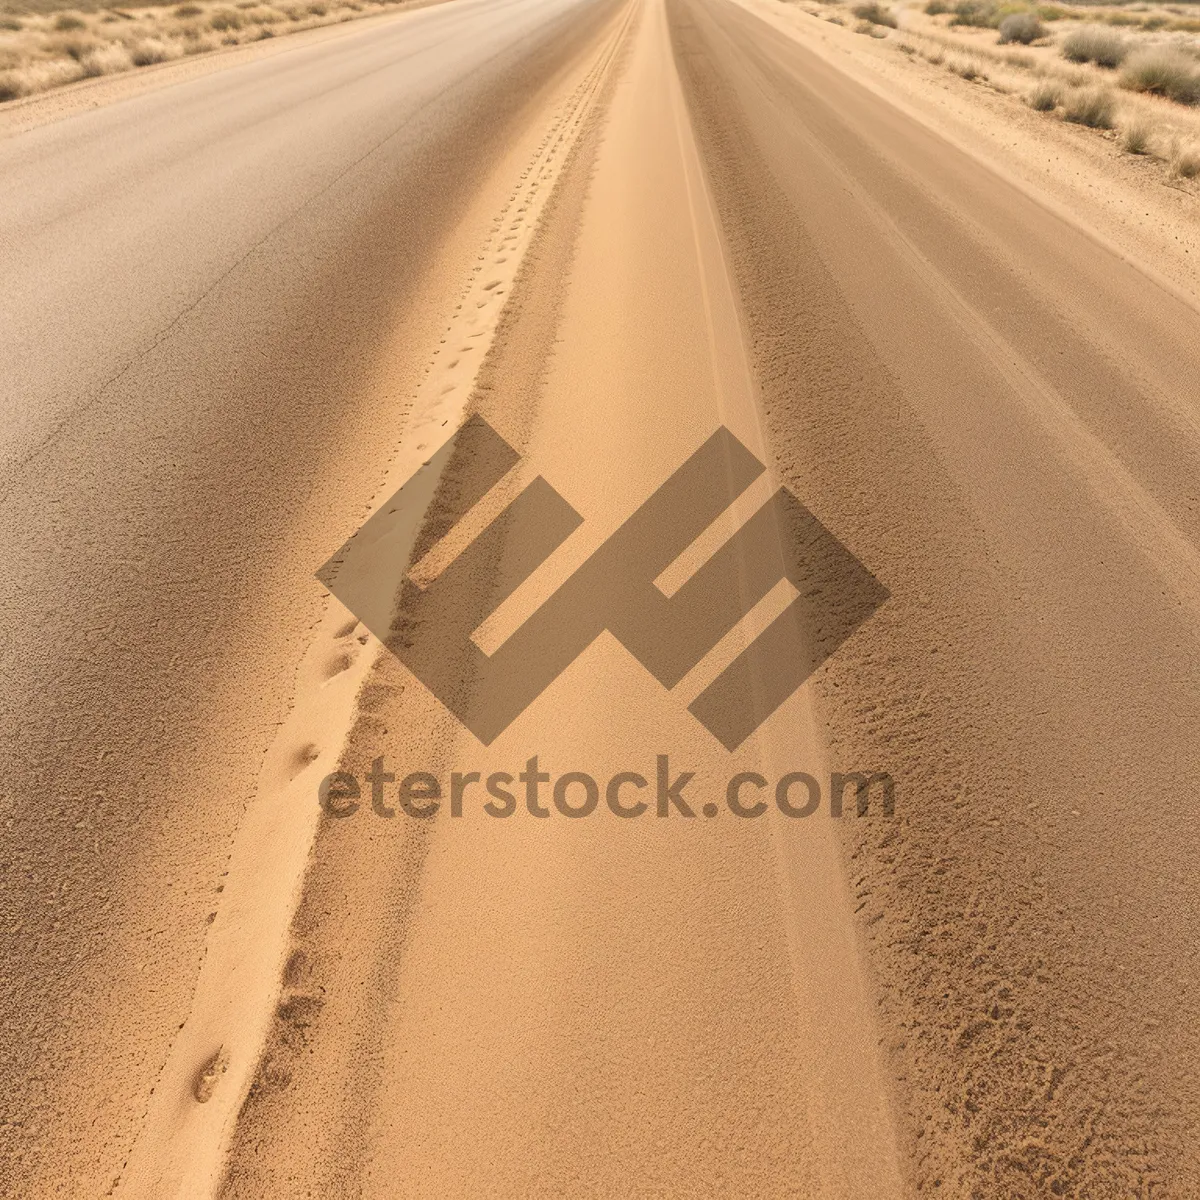 Picture of Endless Desert Road, Earthy Dunes Underneath Wide Sky